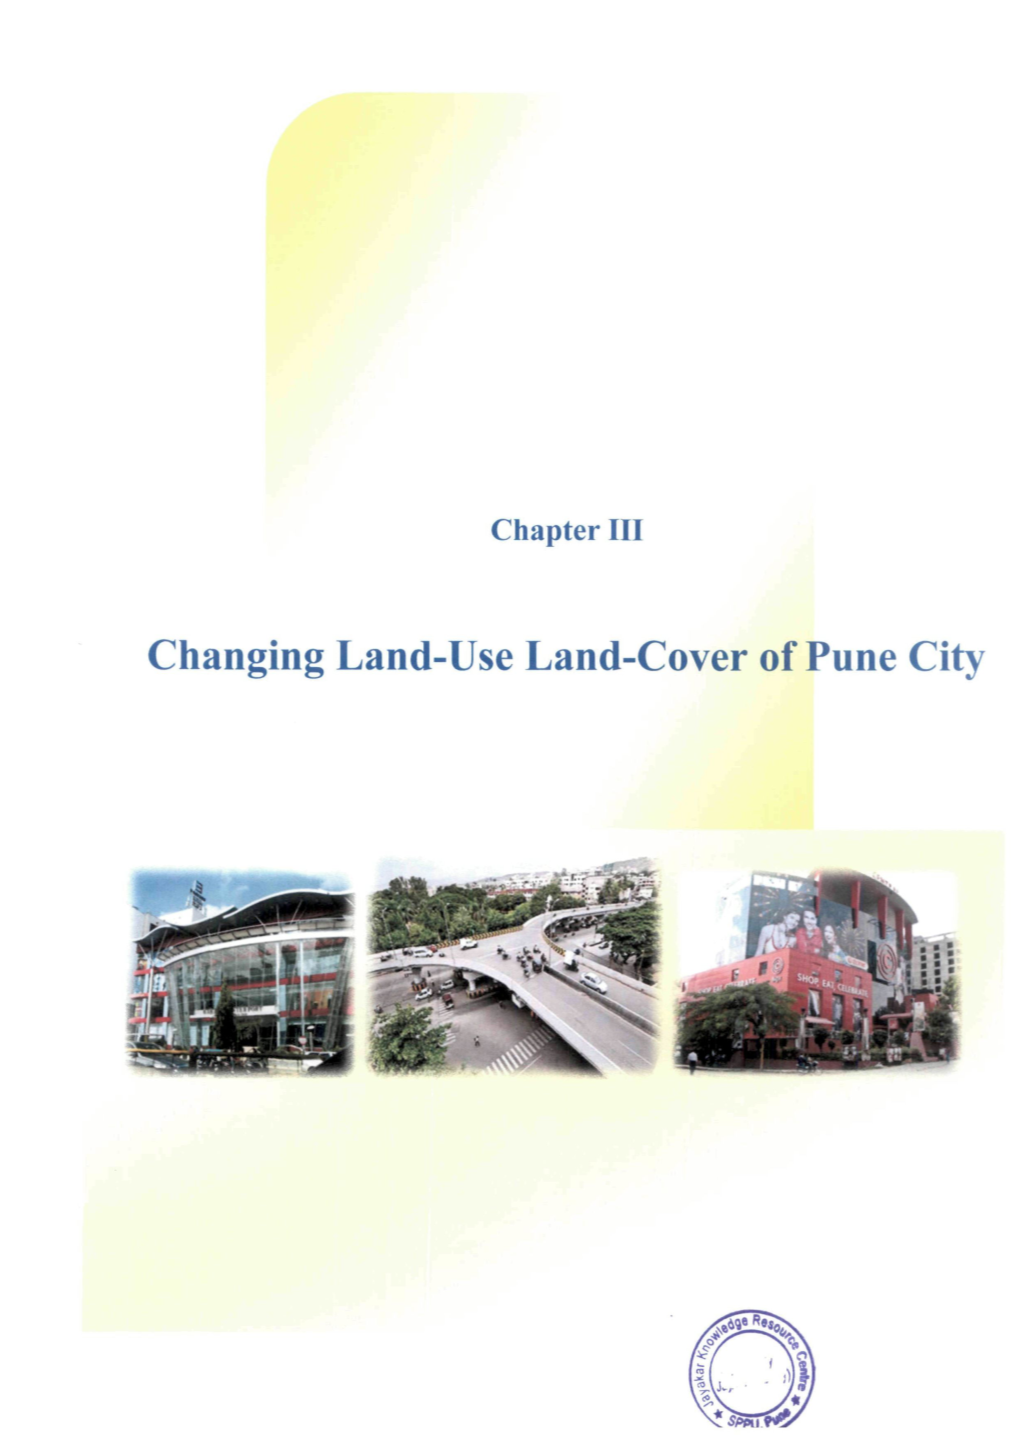 Changing Land-Use Land-Cover of Pune City Chapter III